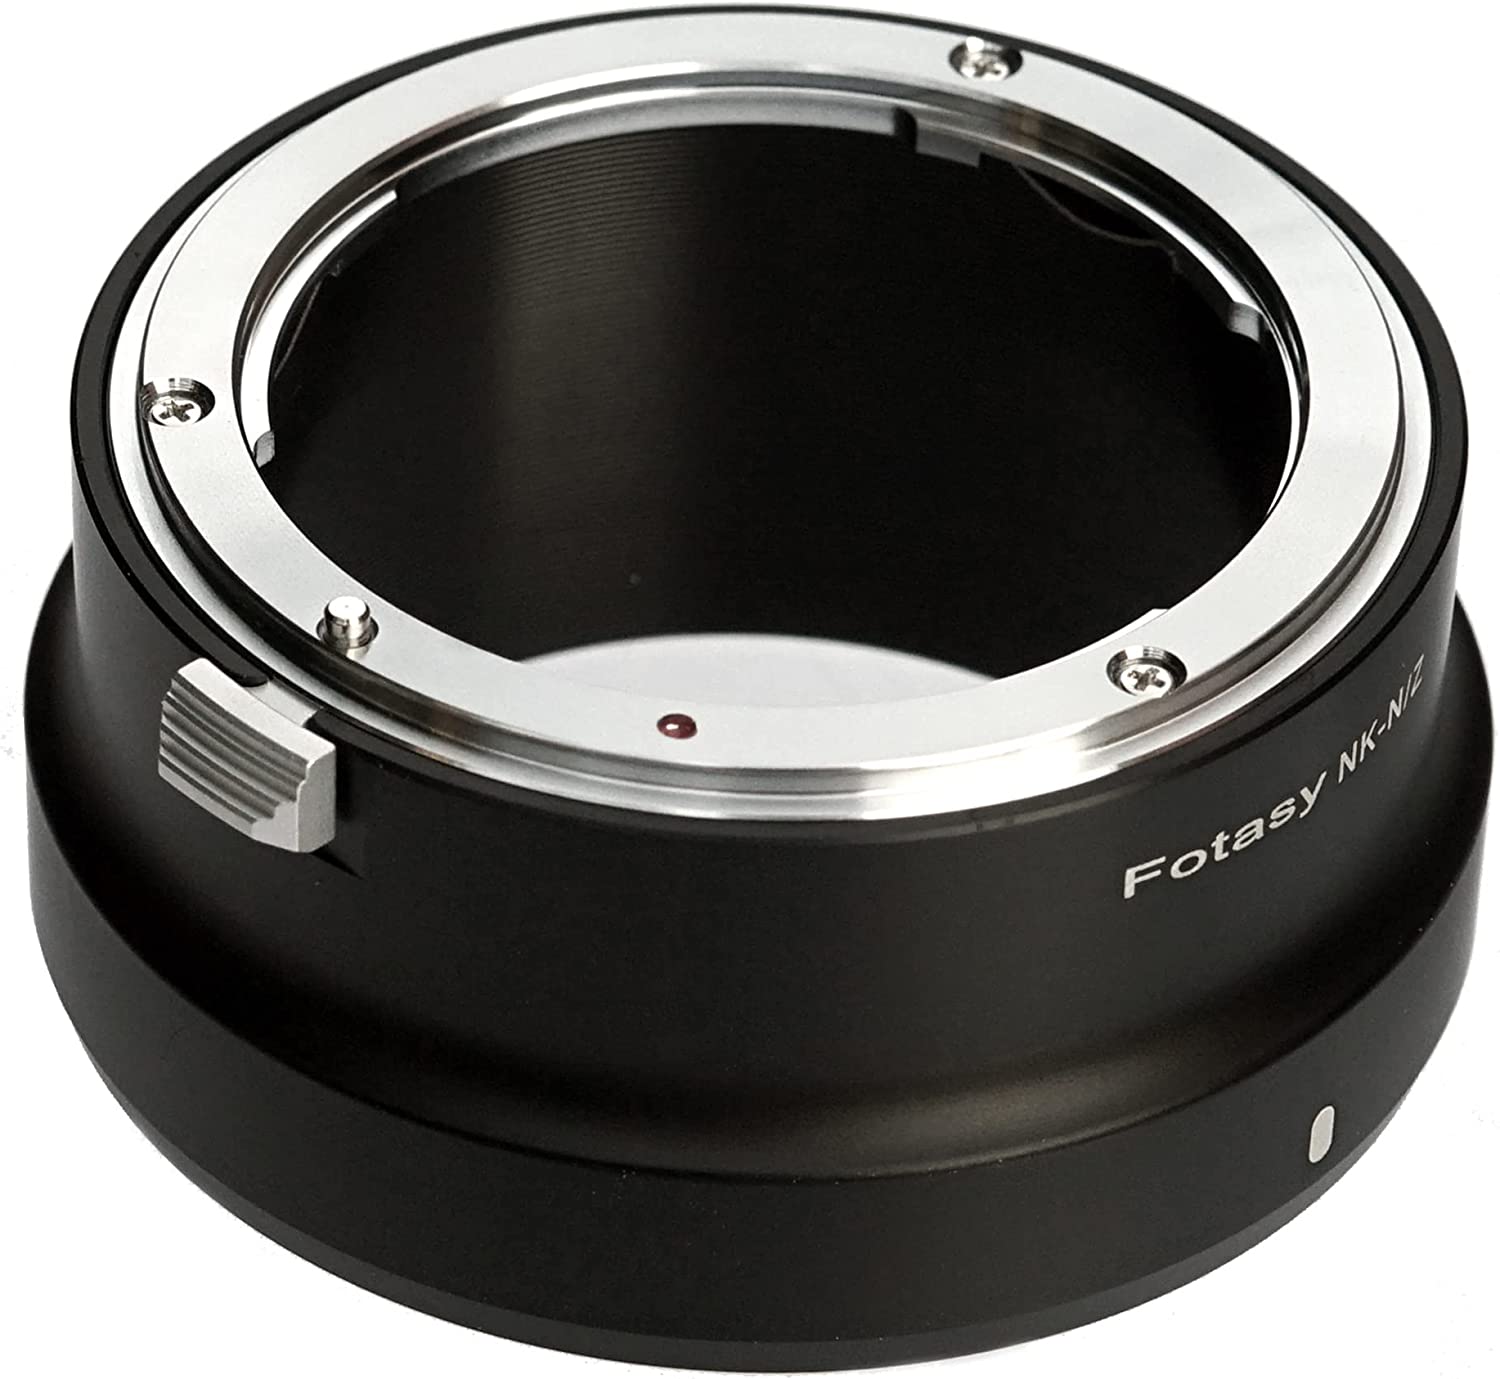 This Fotasy Nikon F to Z mount adapter costs only $16.29 - Nikon 